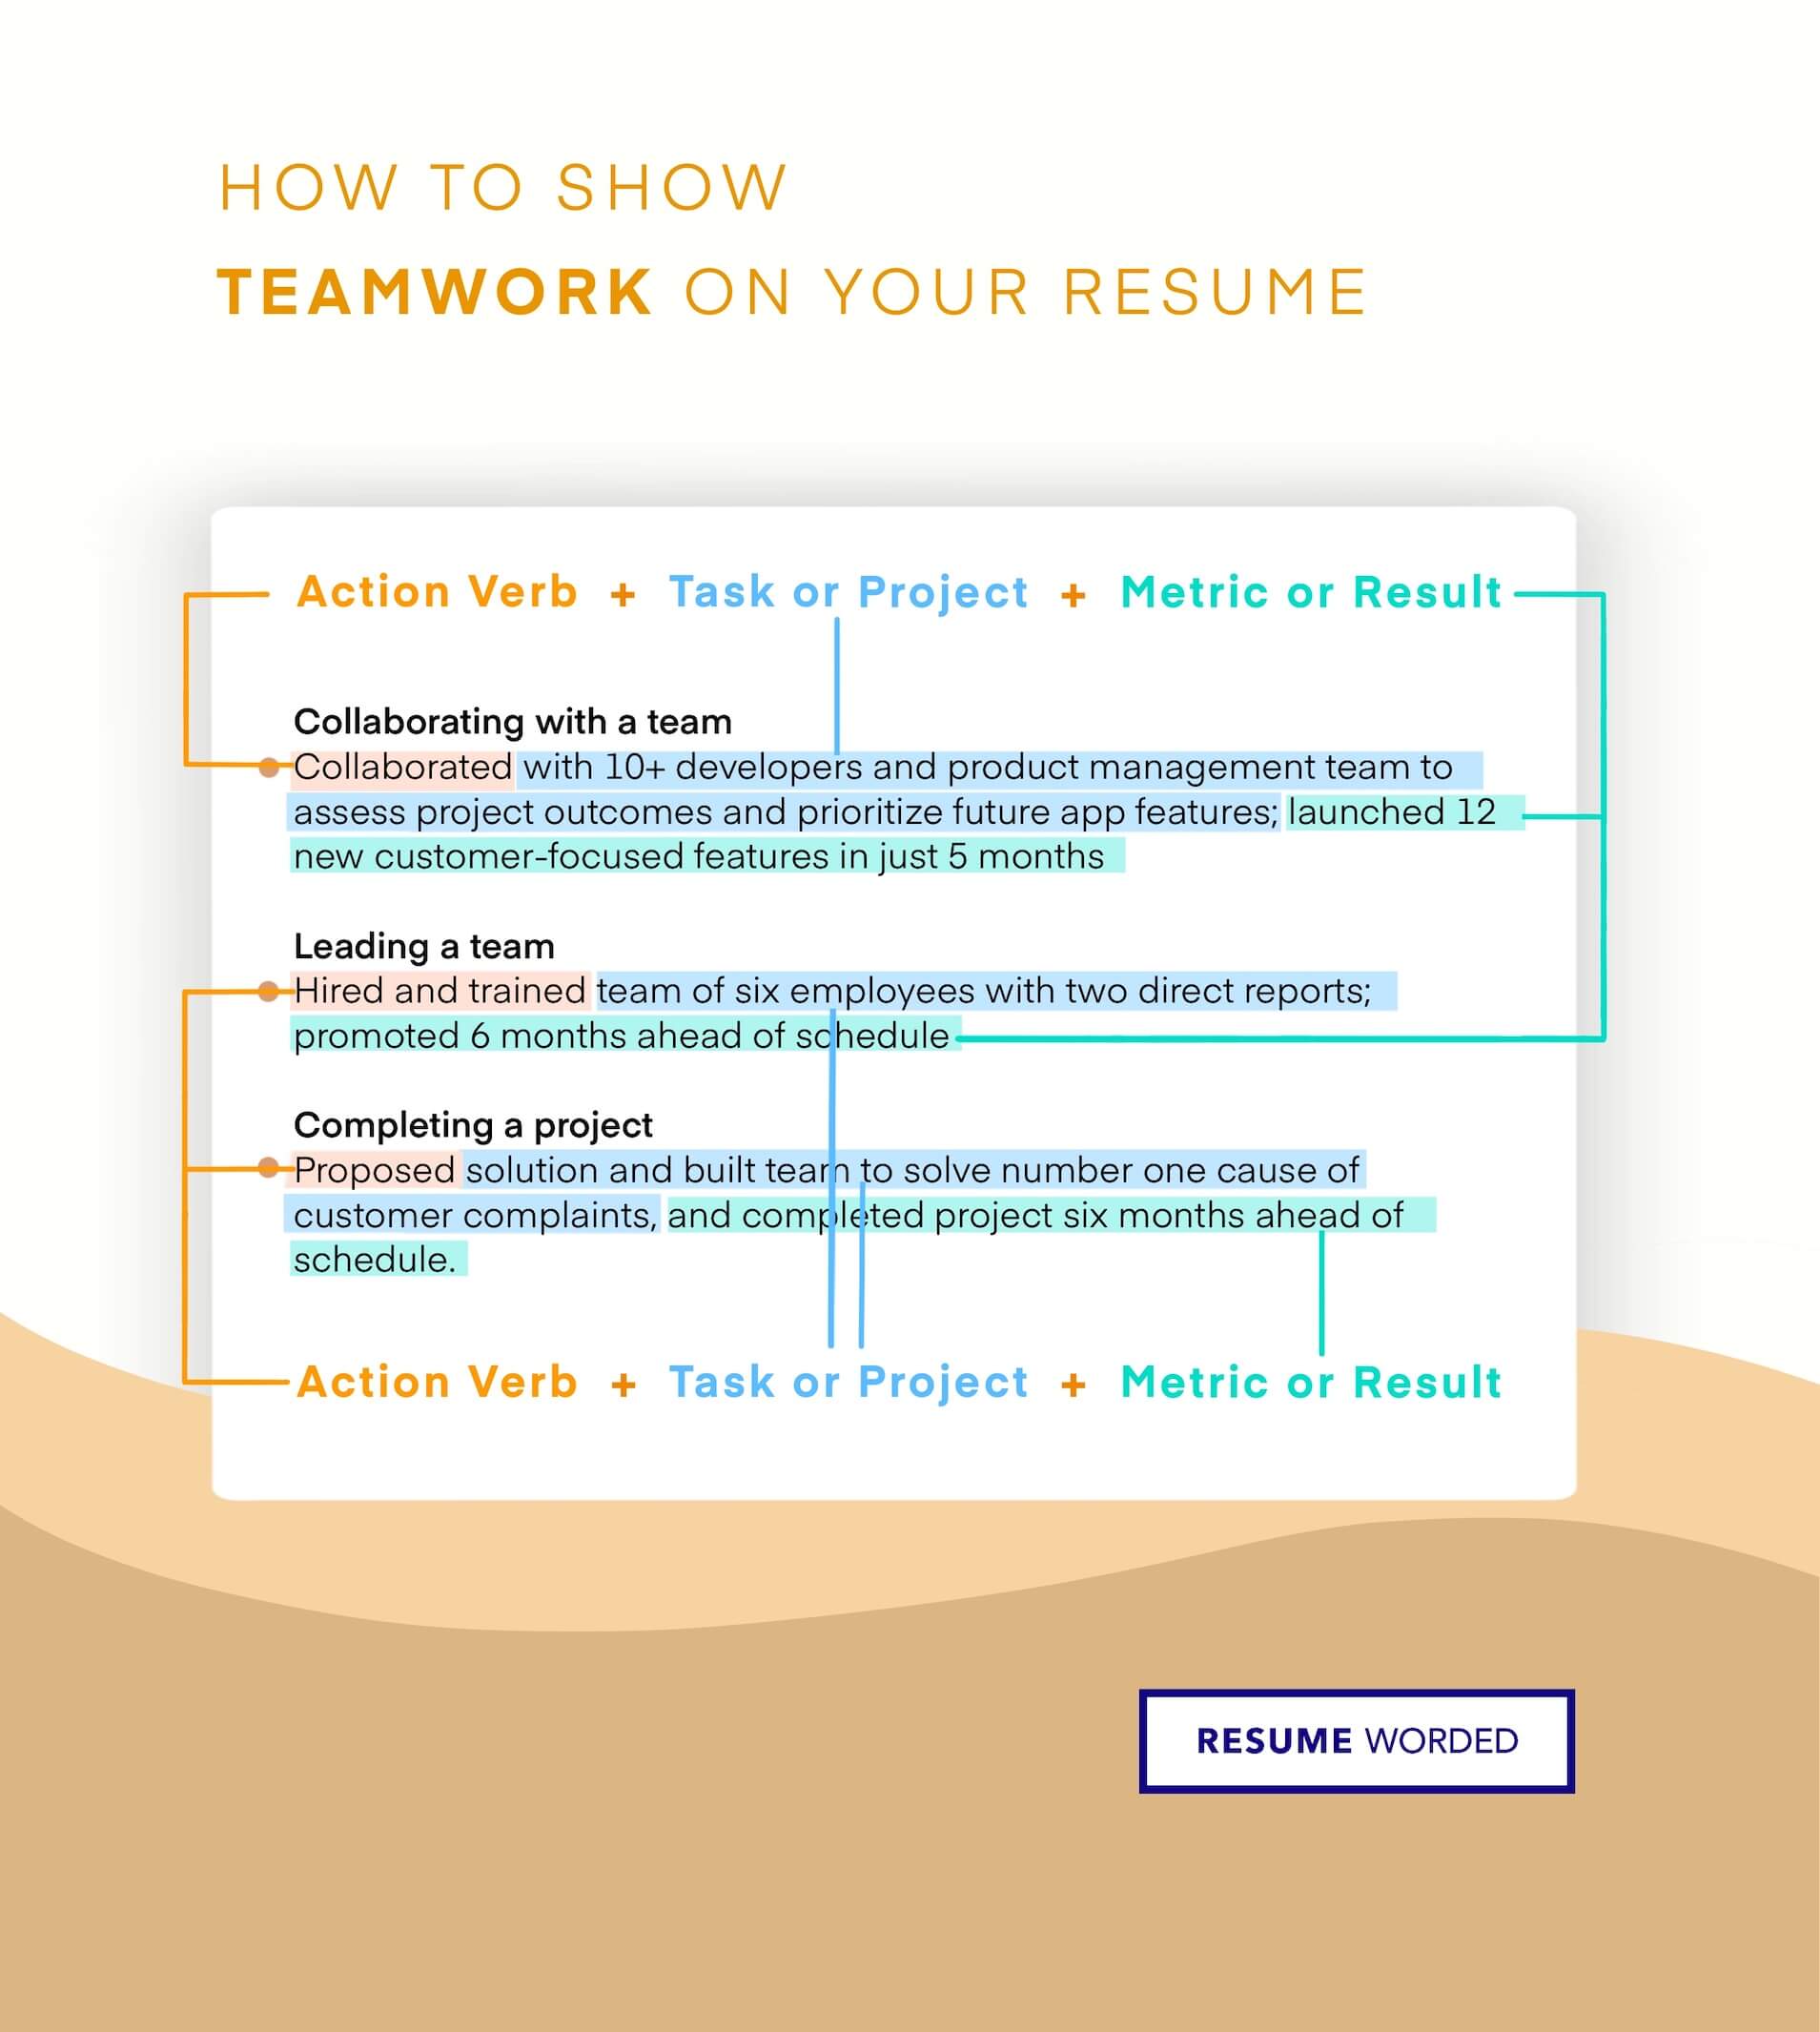 Demonstrate your ability to lead a technical team. - Maintenance Manager Resume